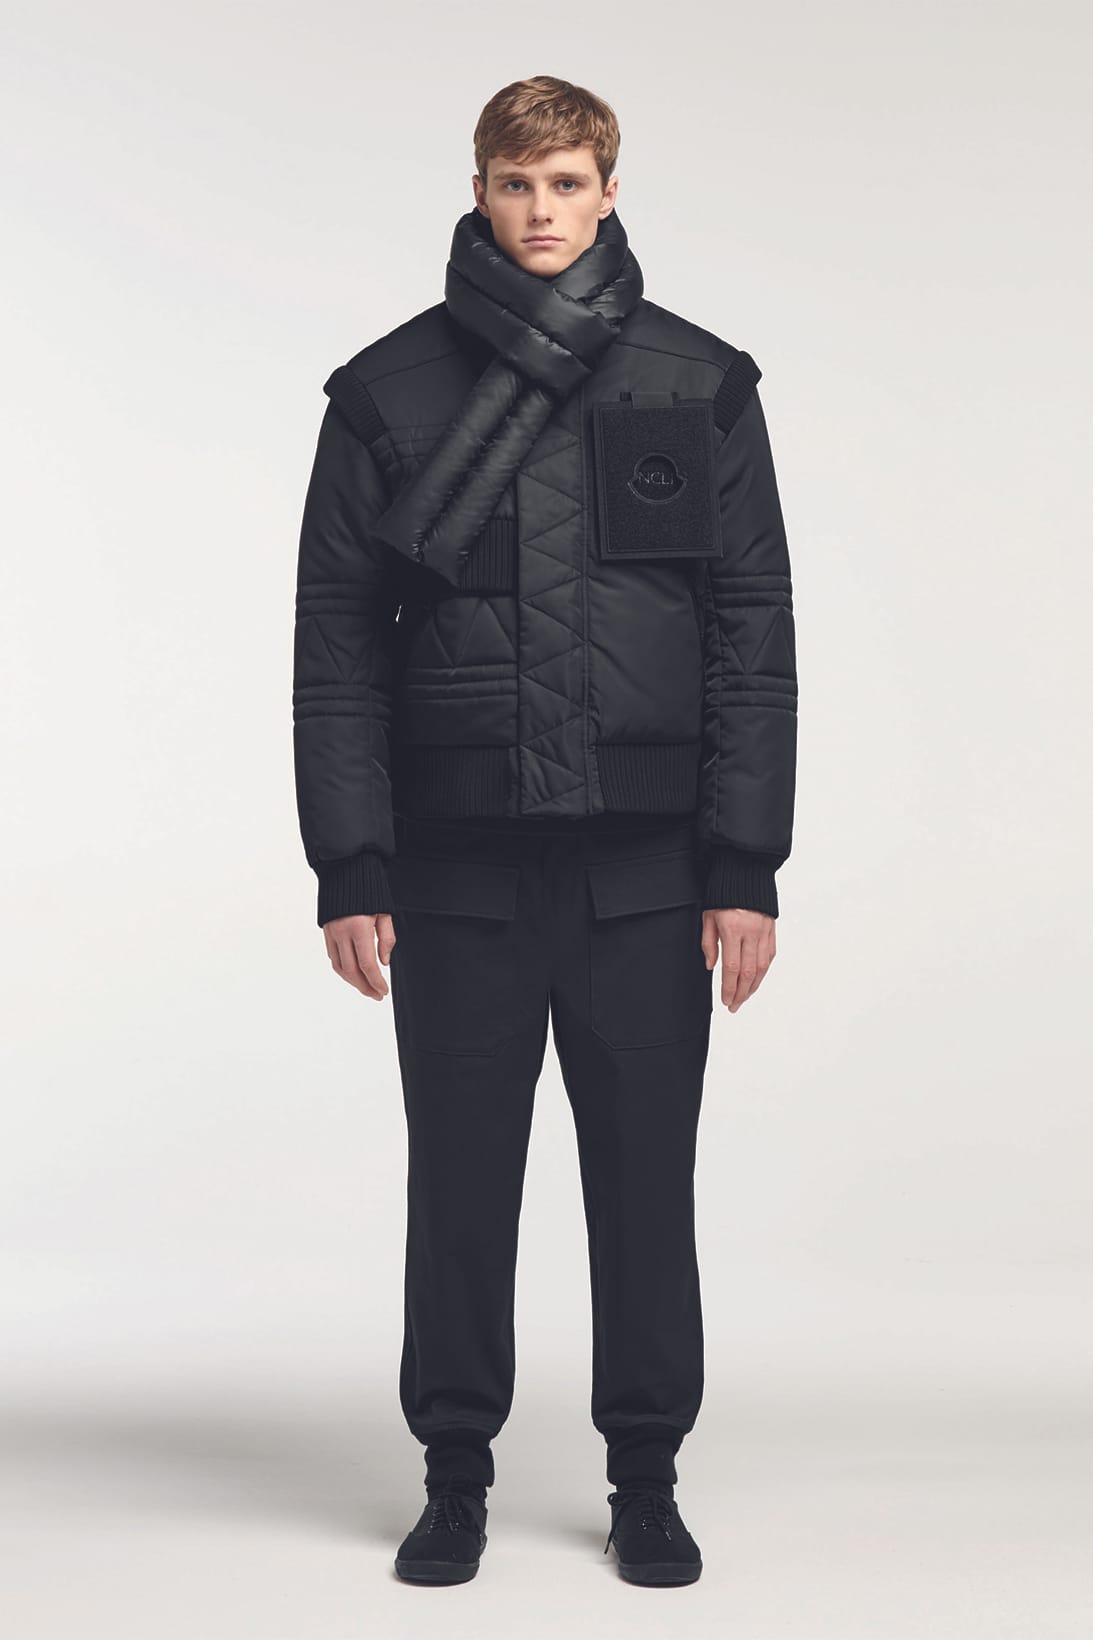 Moncler C by Craig Green Collection | HYPEBEAST